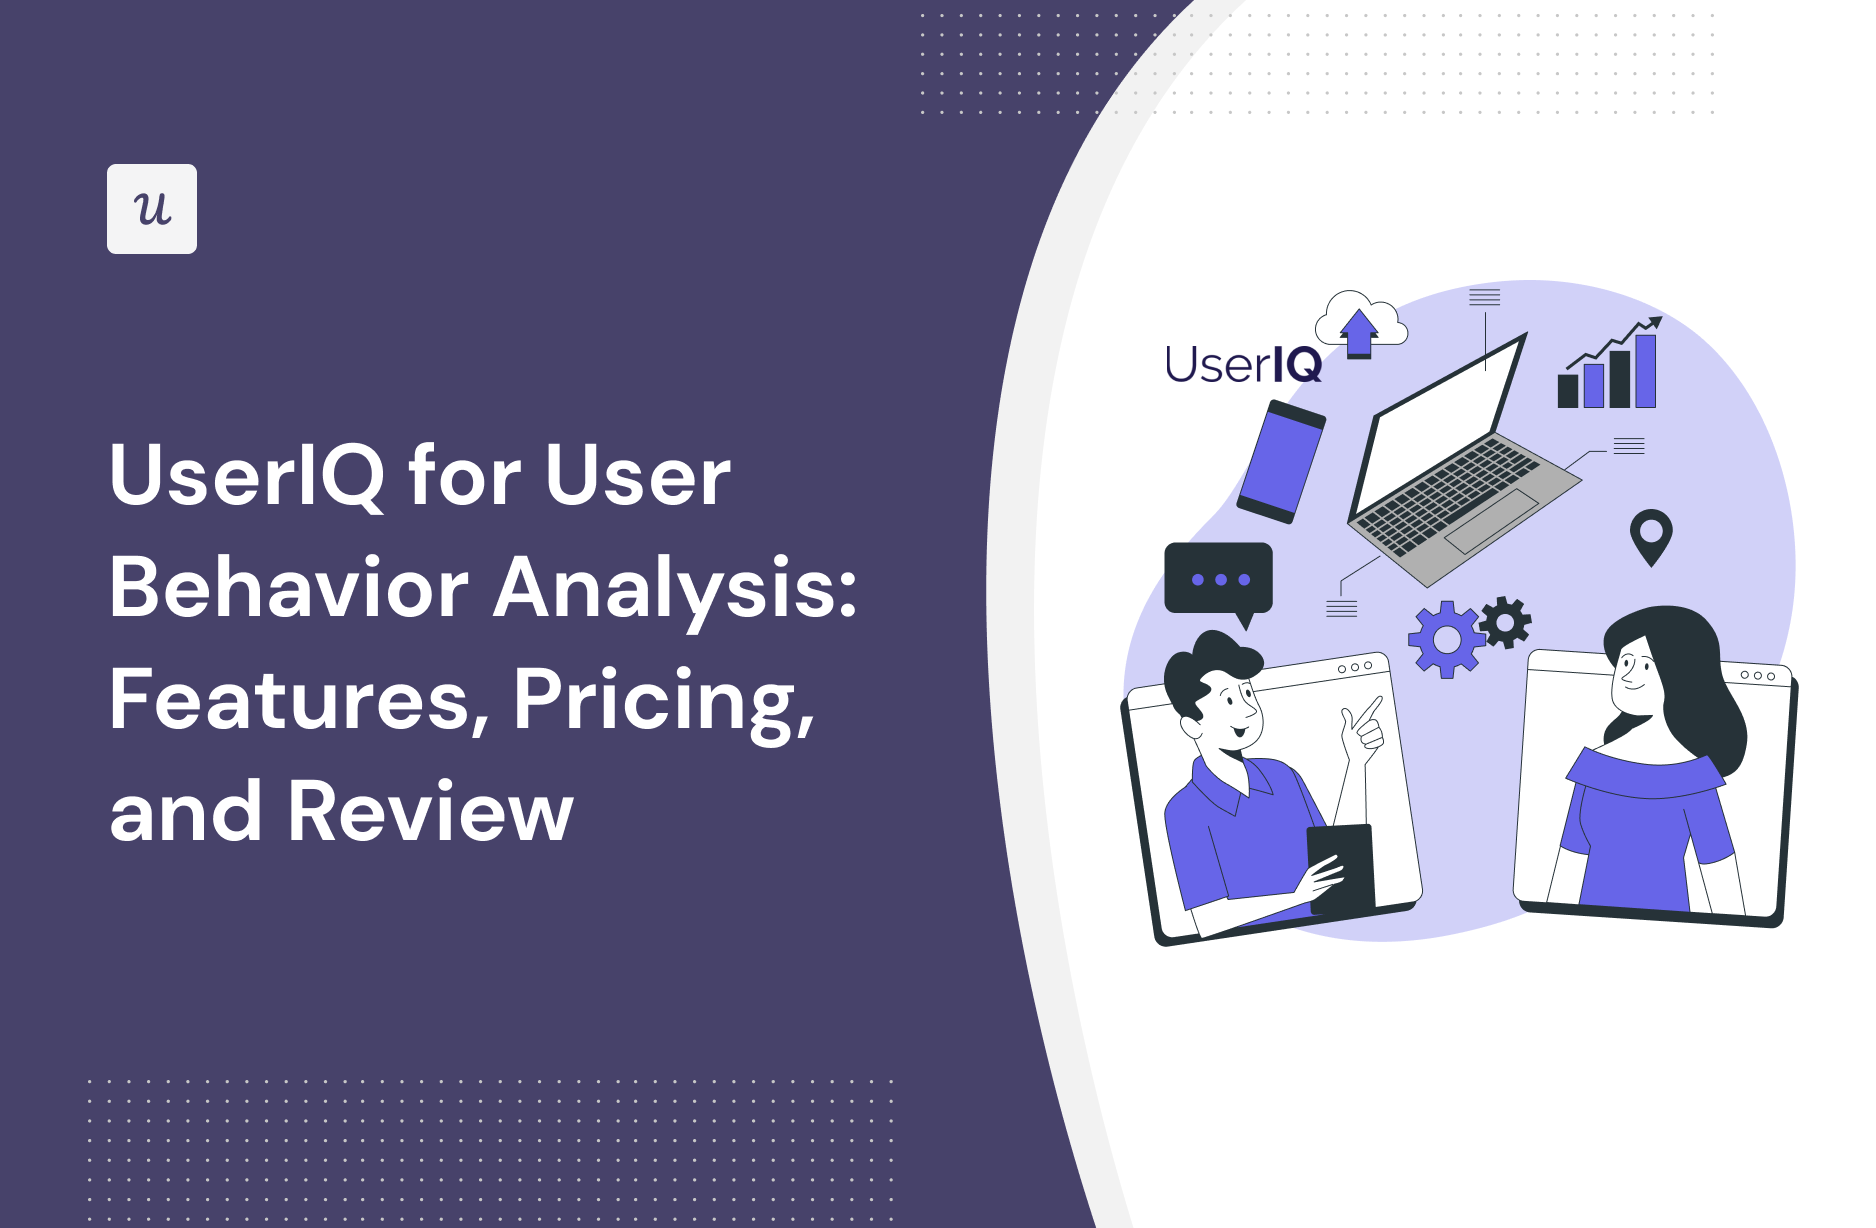 UserIQ for User Behavior Analysis: Features, Pricing, and Review